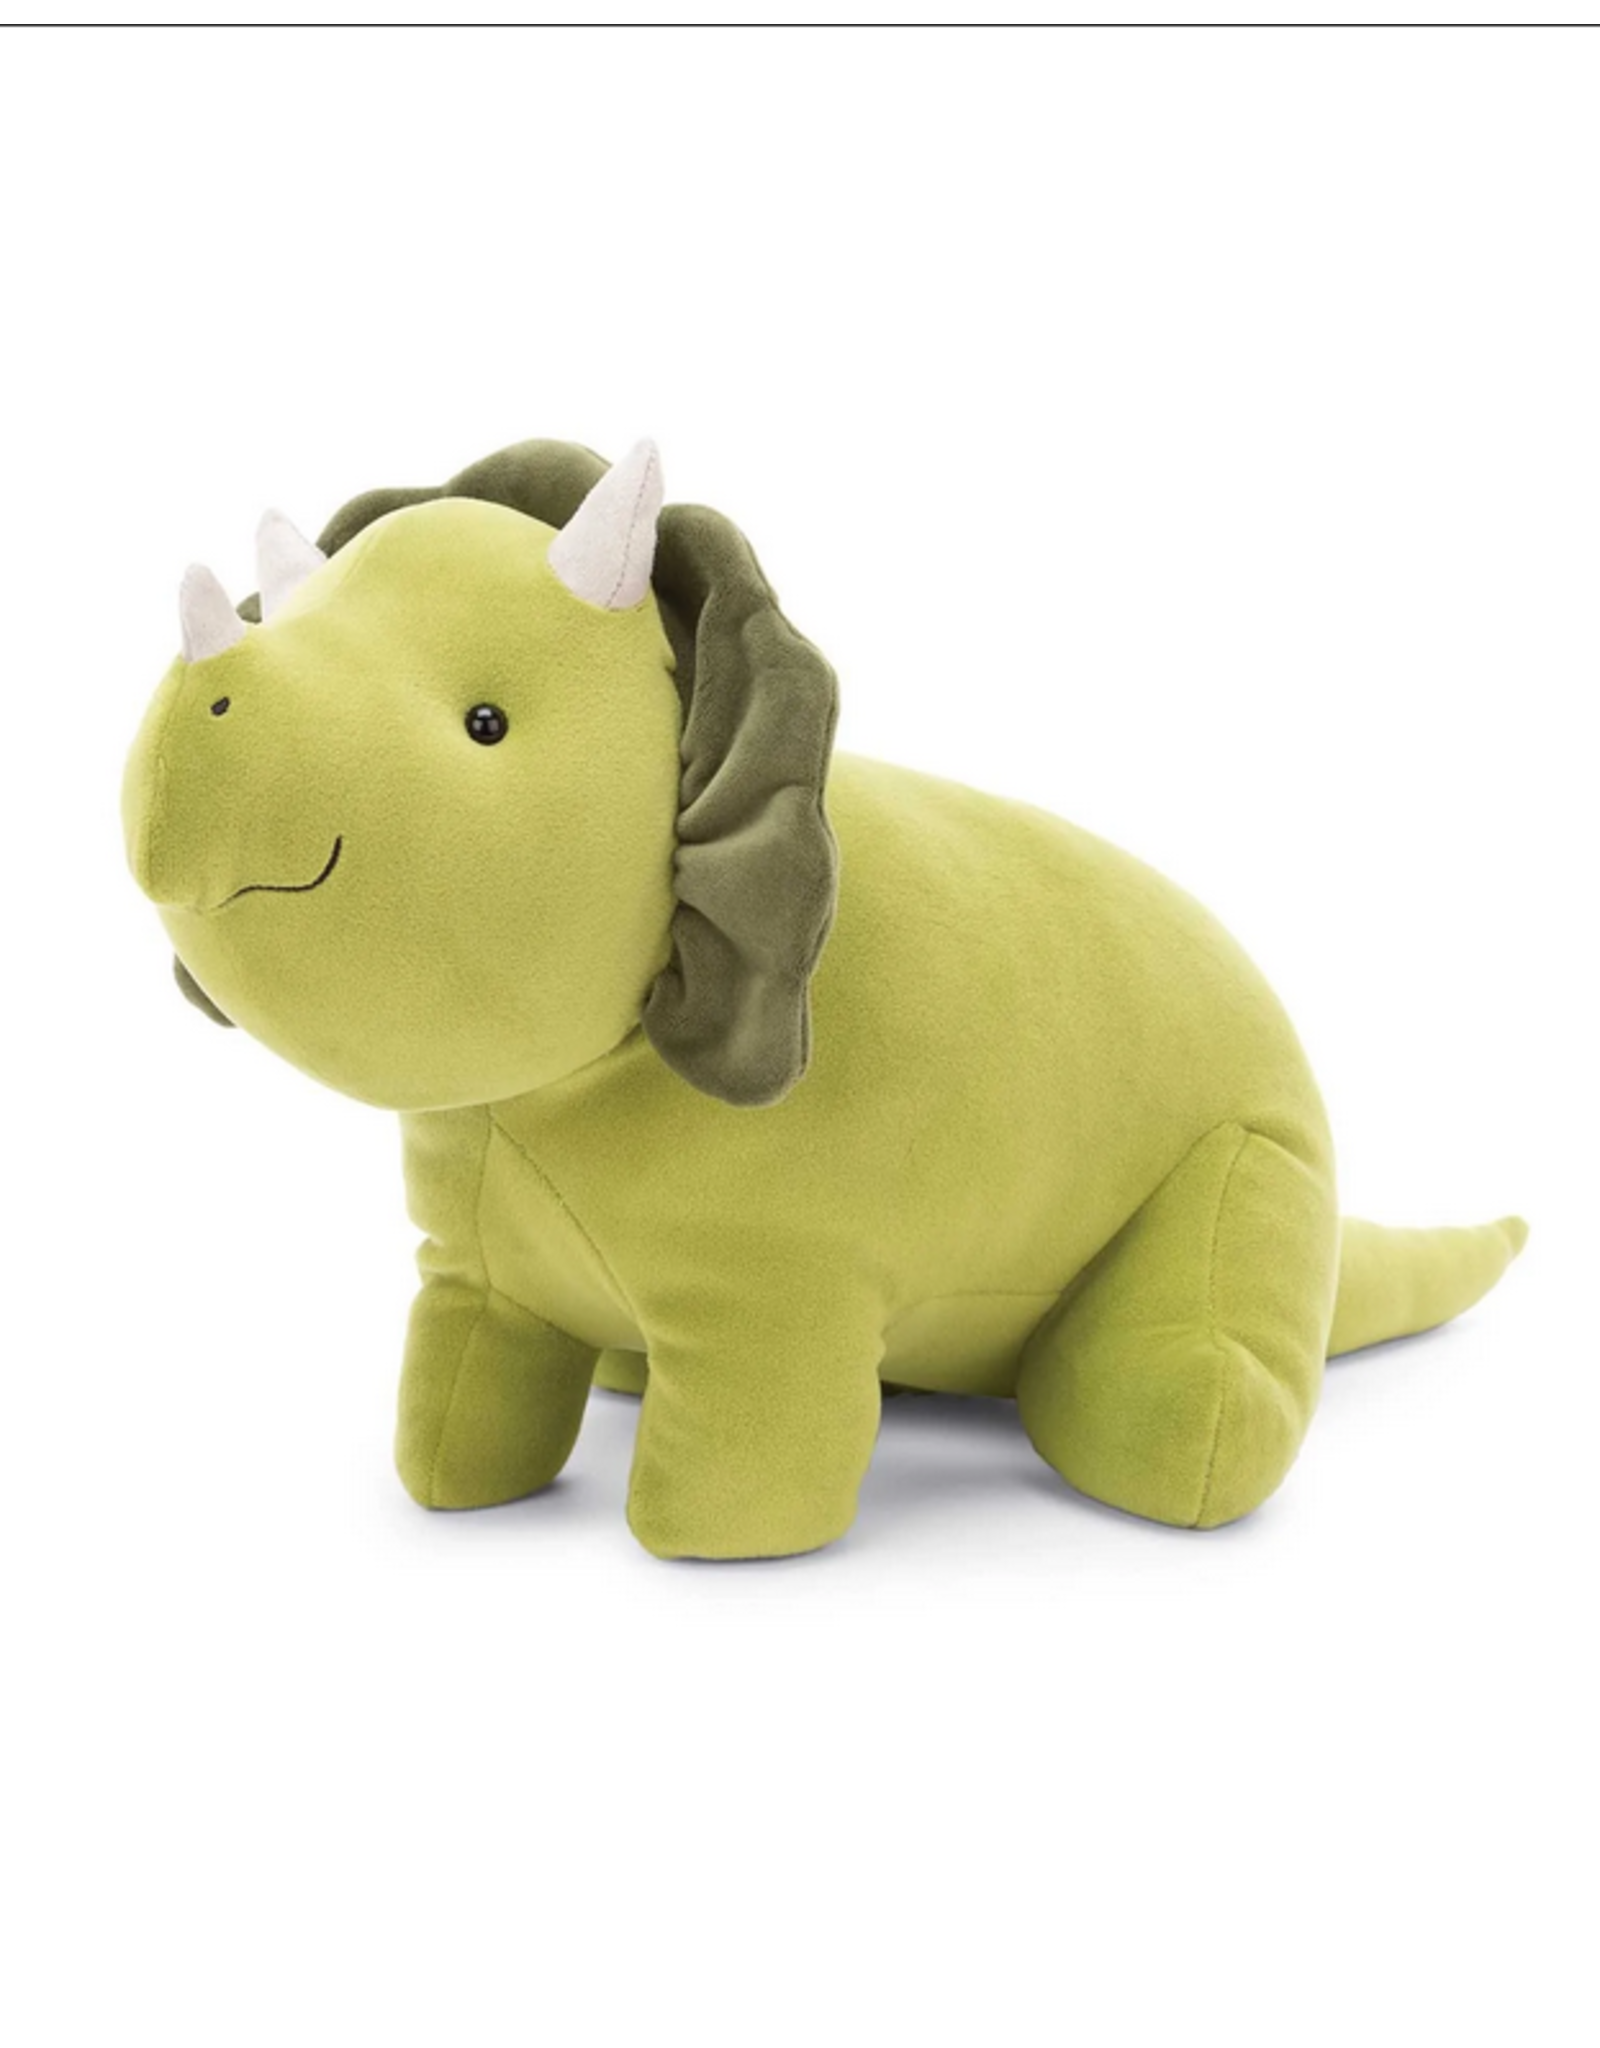 Jellycat Mellow Mallow Triceratops-Large